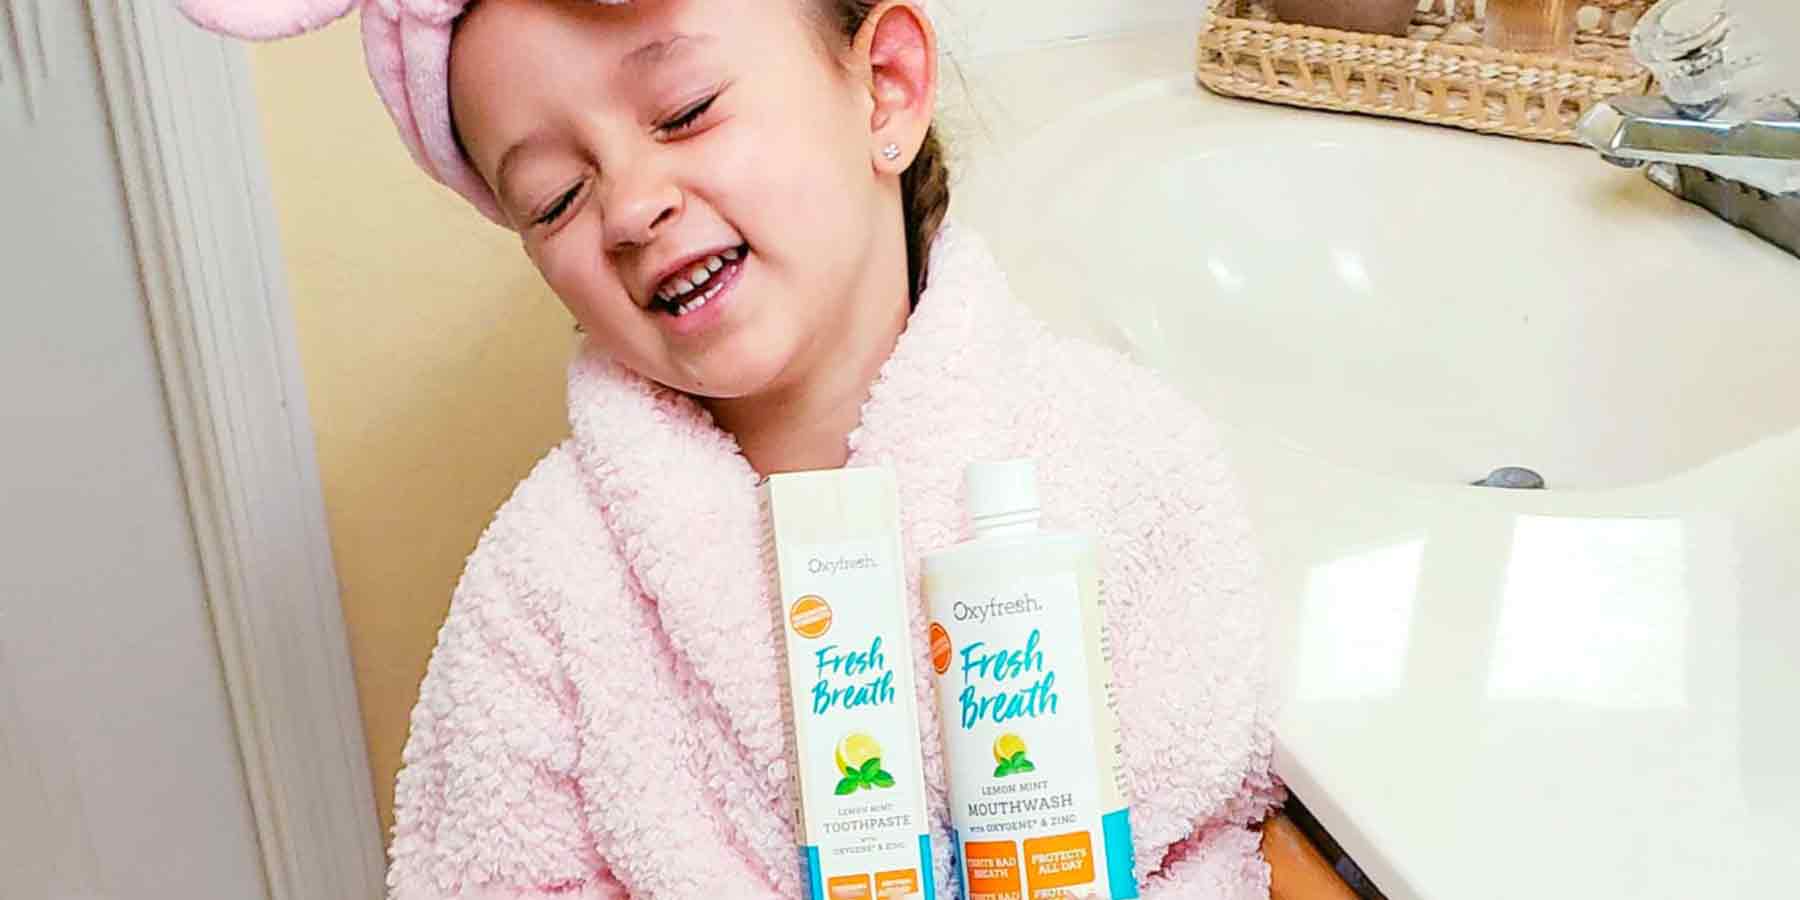 instagram-image-of-child-holding-oxyfresh-fresh-breath-lemon-mint-toothpaste-and-non-toxic-mouthwash-for-bad-breath